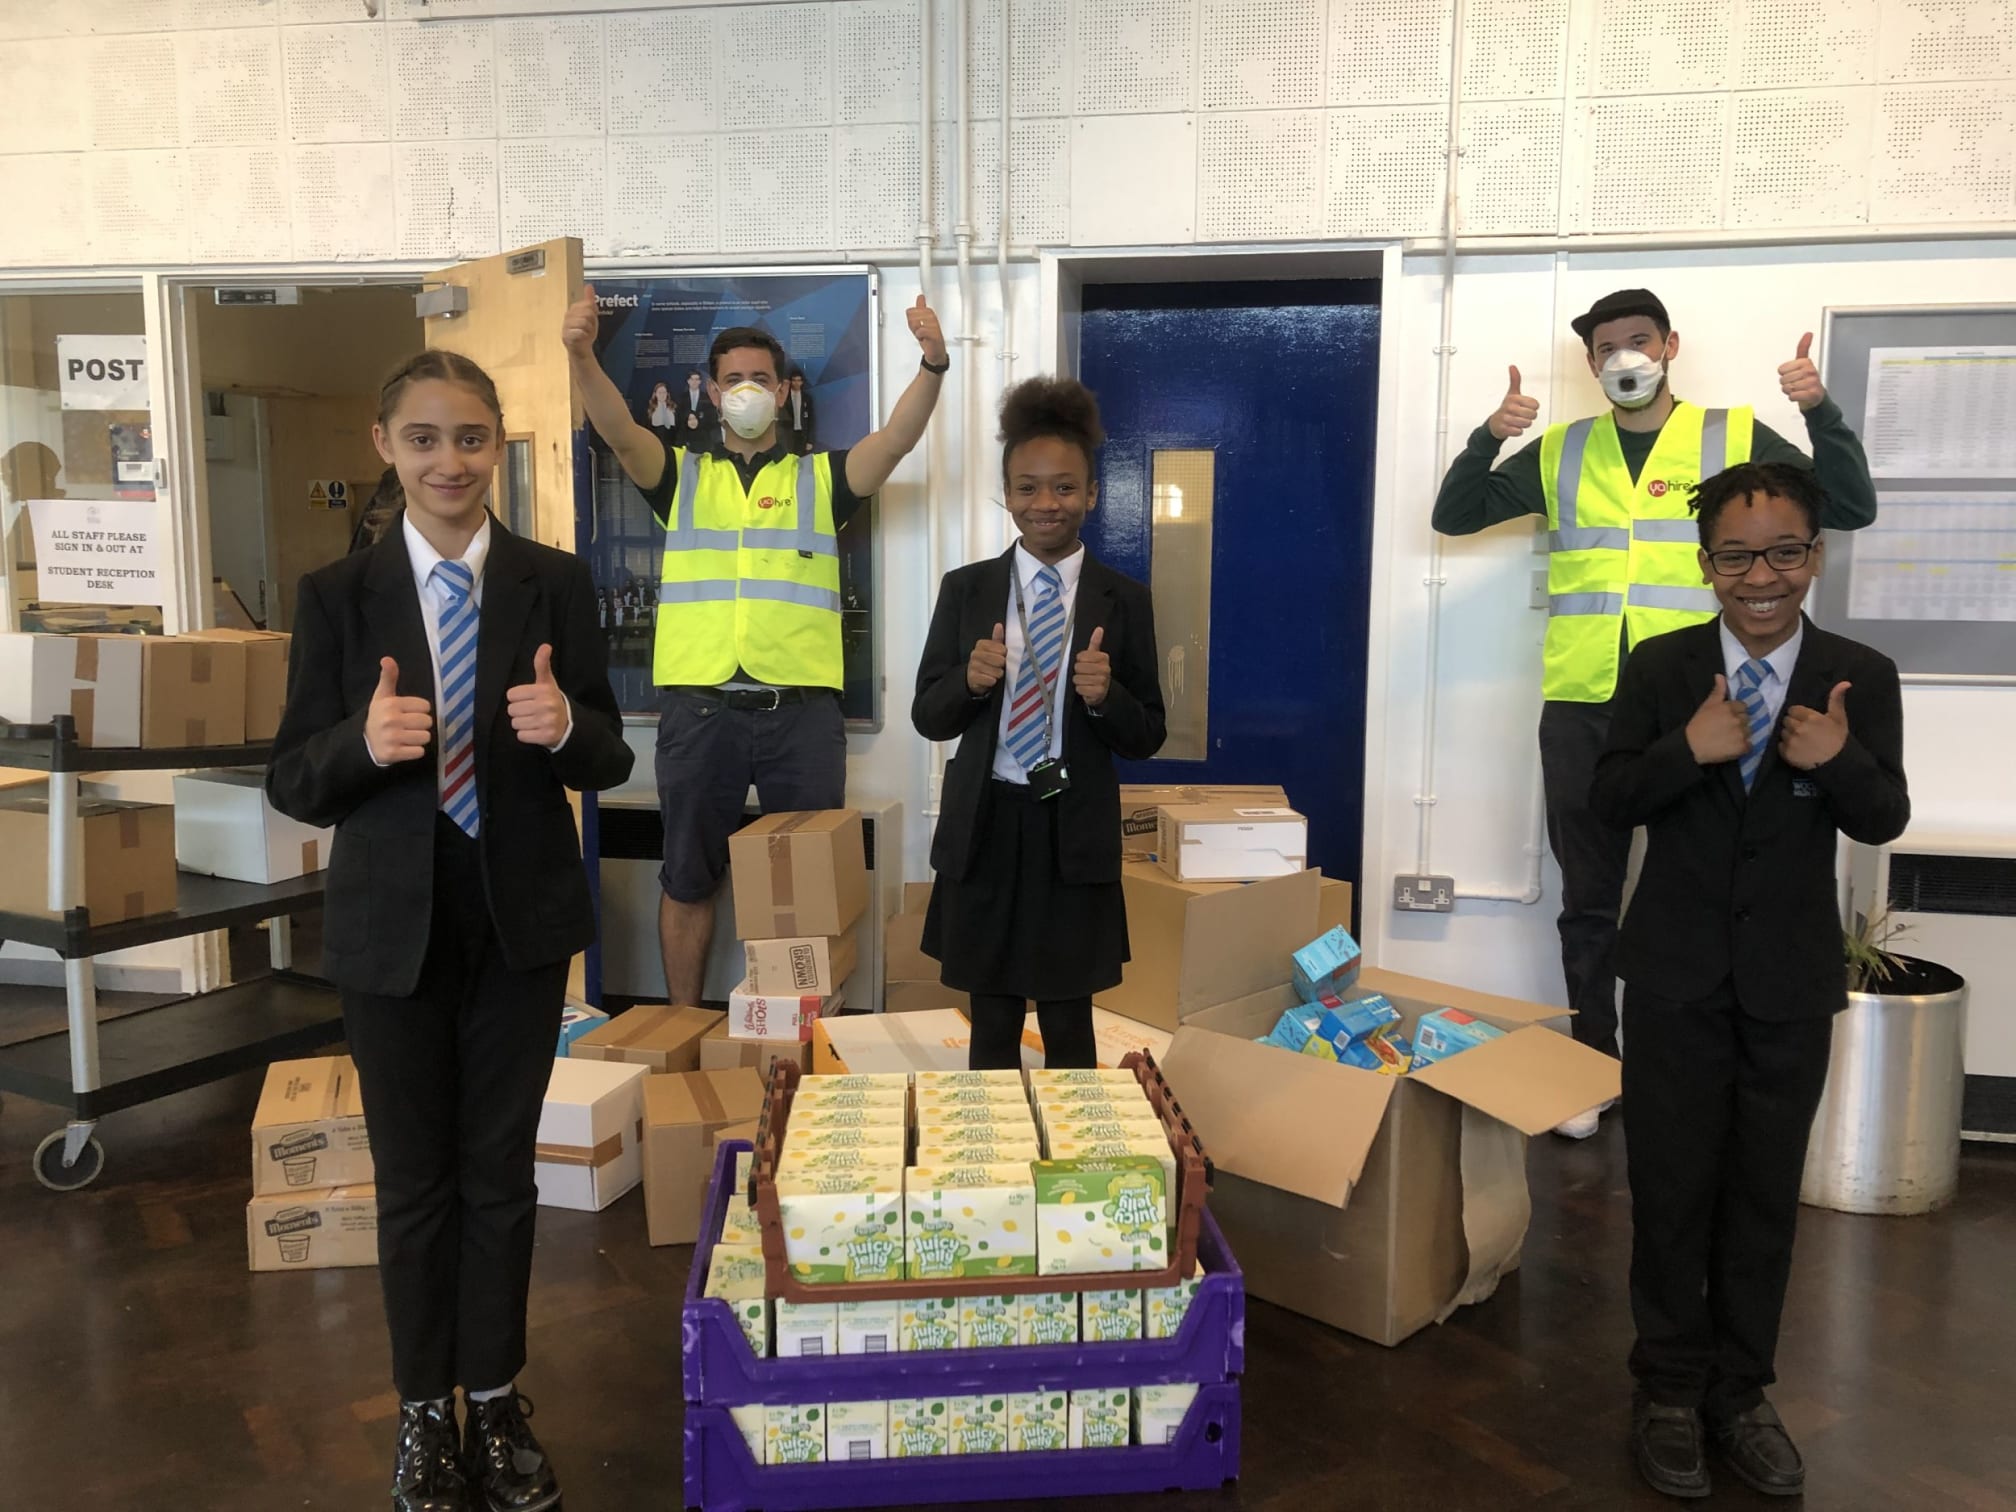 Students taking in a delivery of supplies